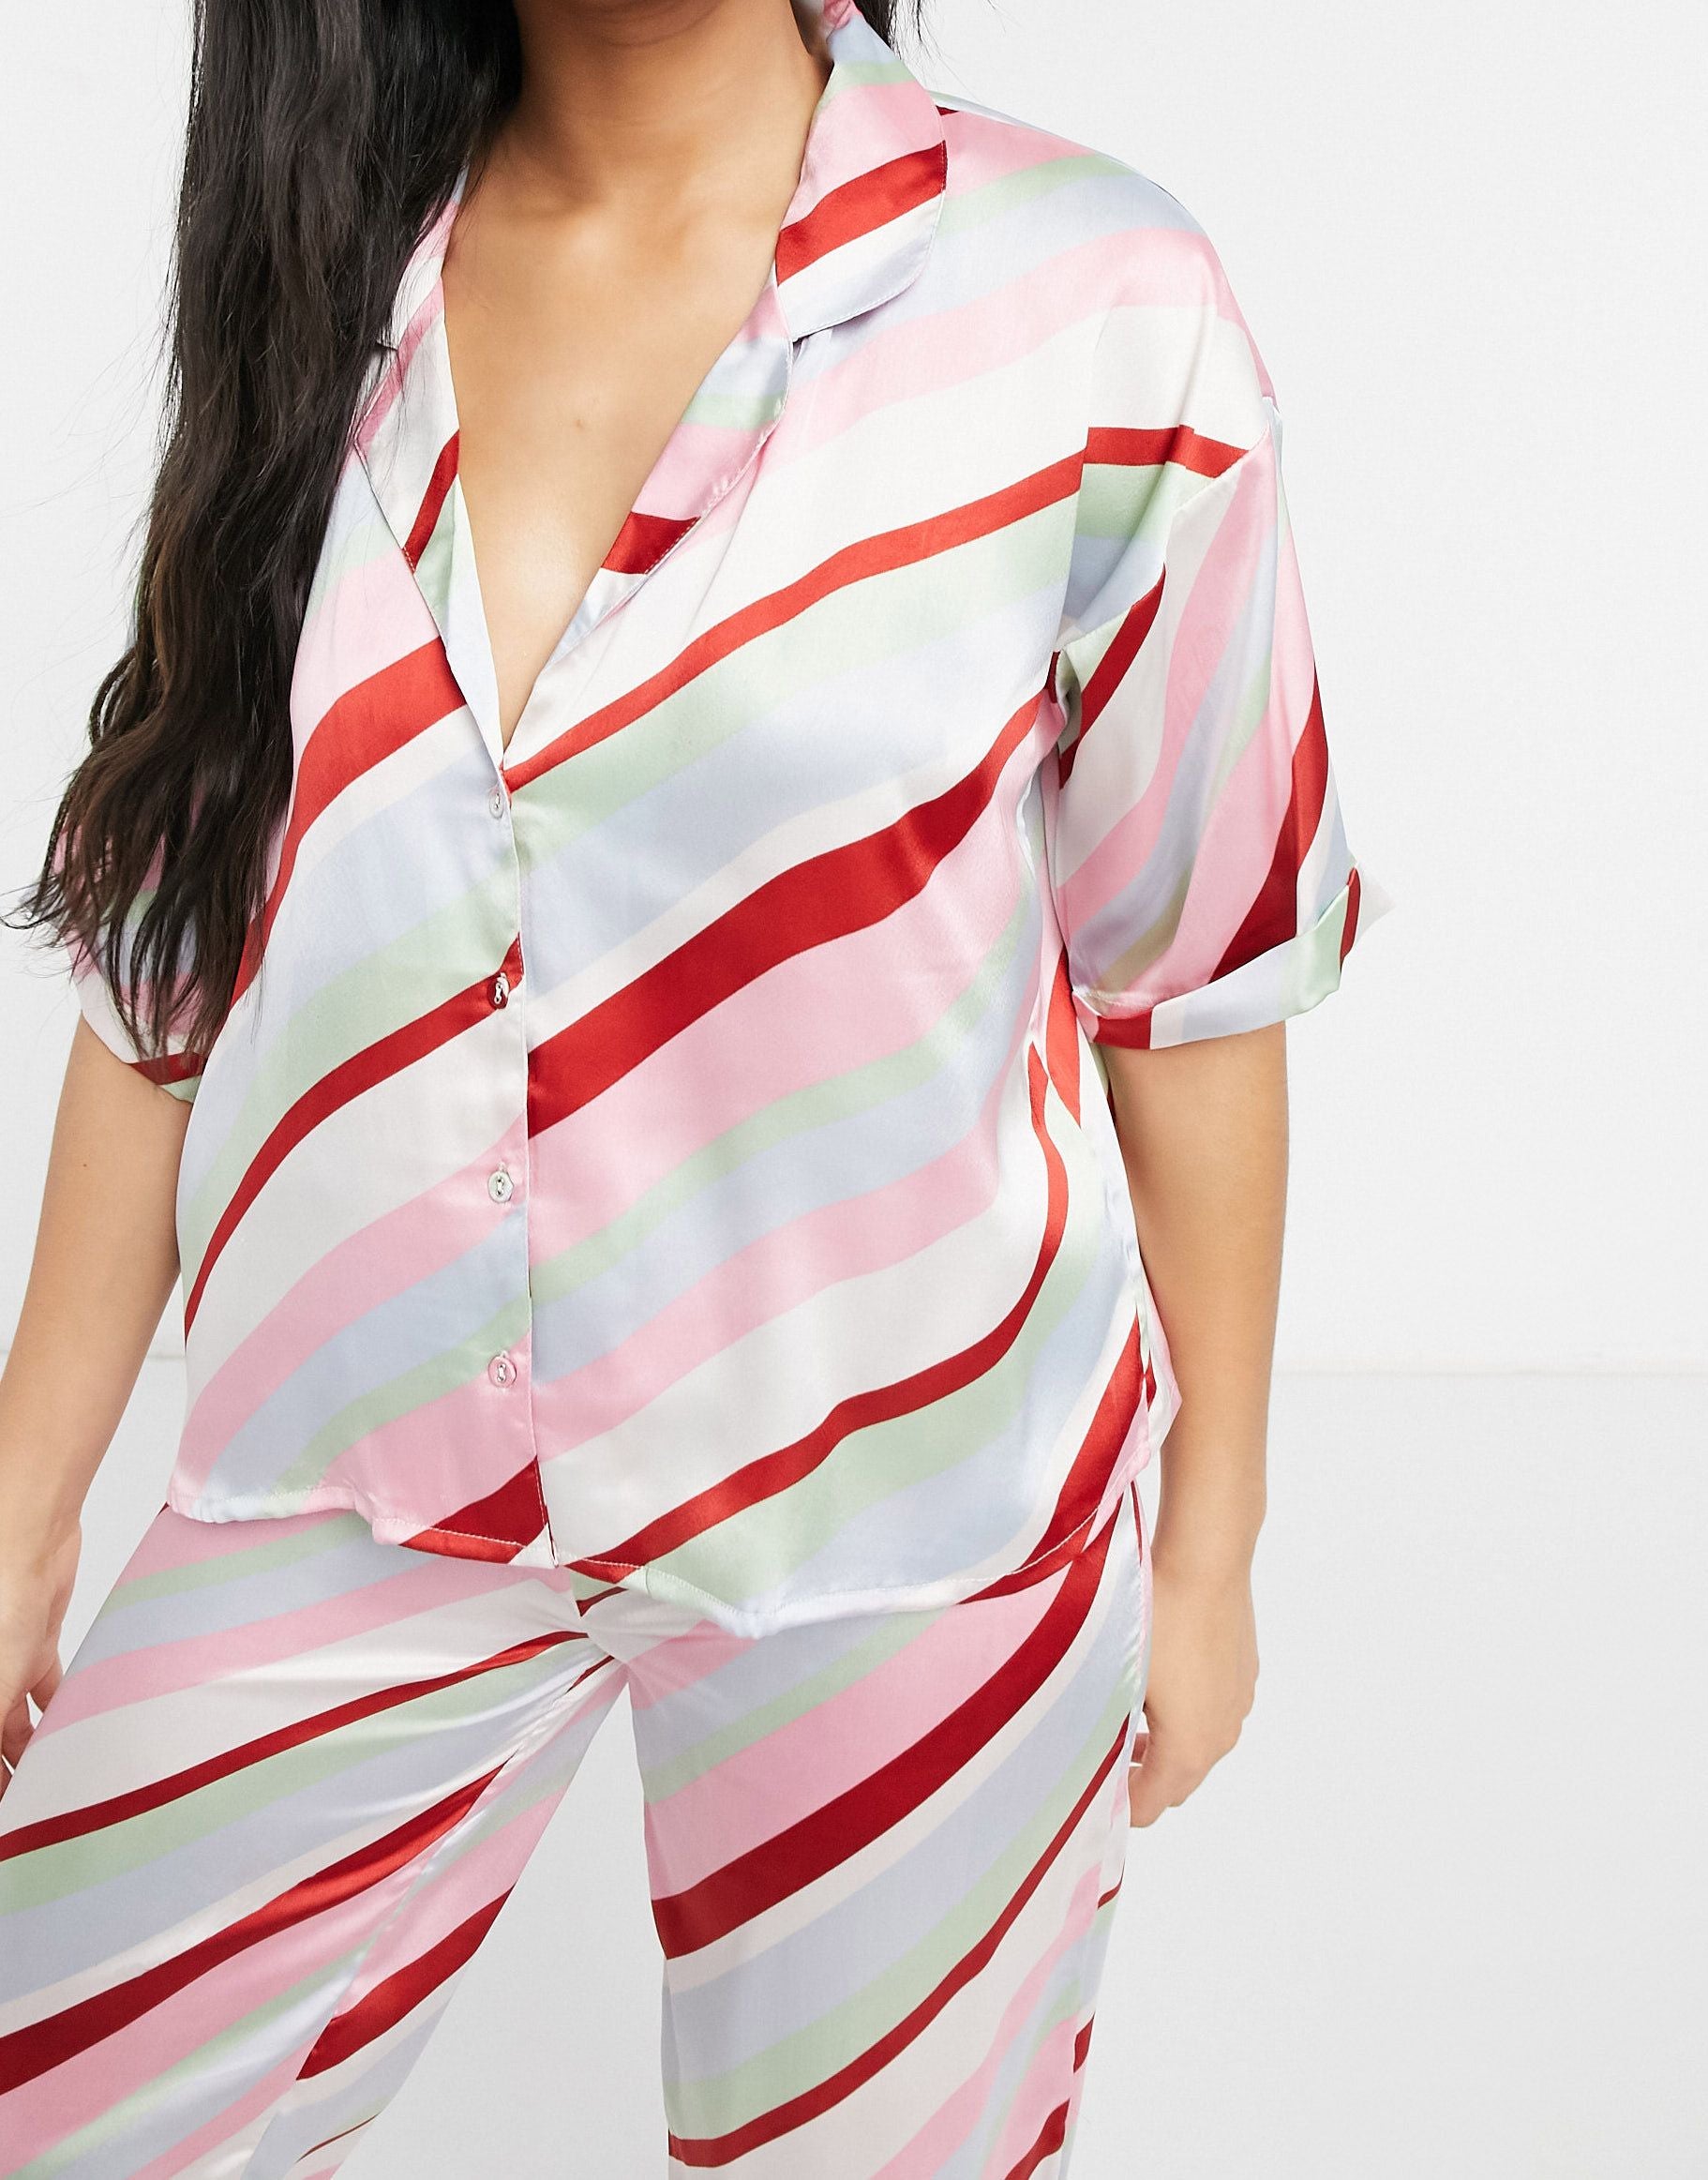 Multi Color Digital Abstract Printed loungewear/Nightsuit For Women With Pants.